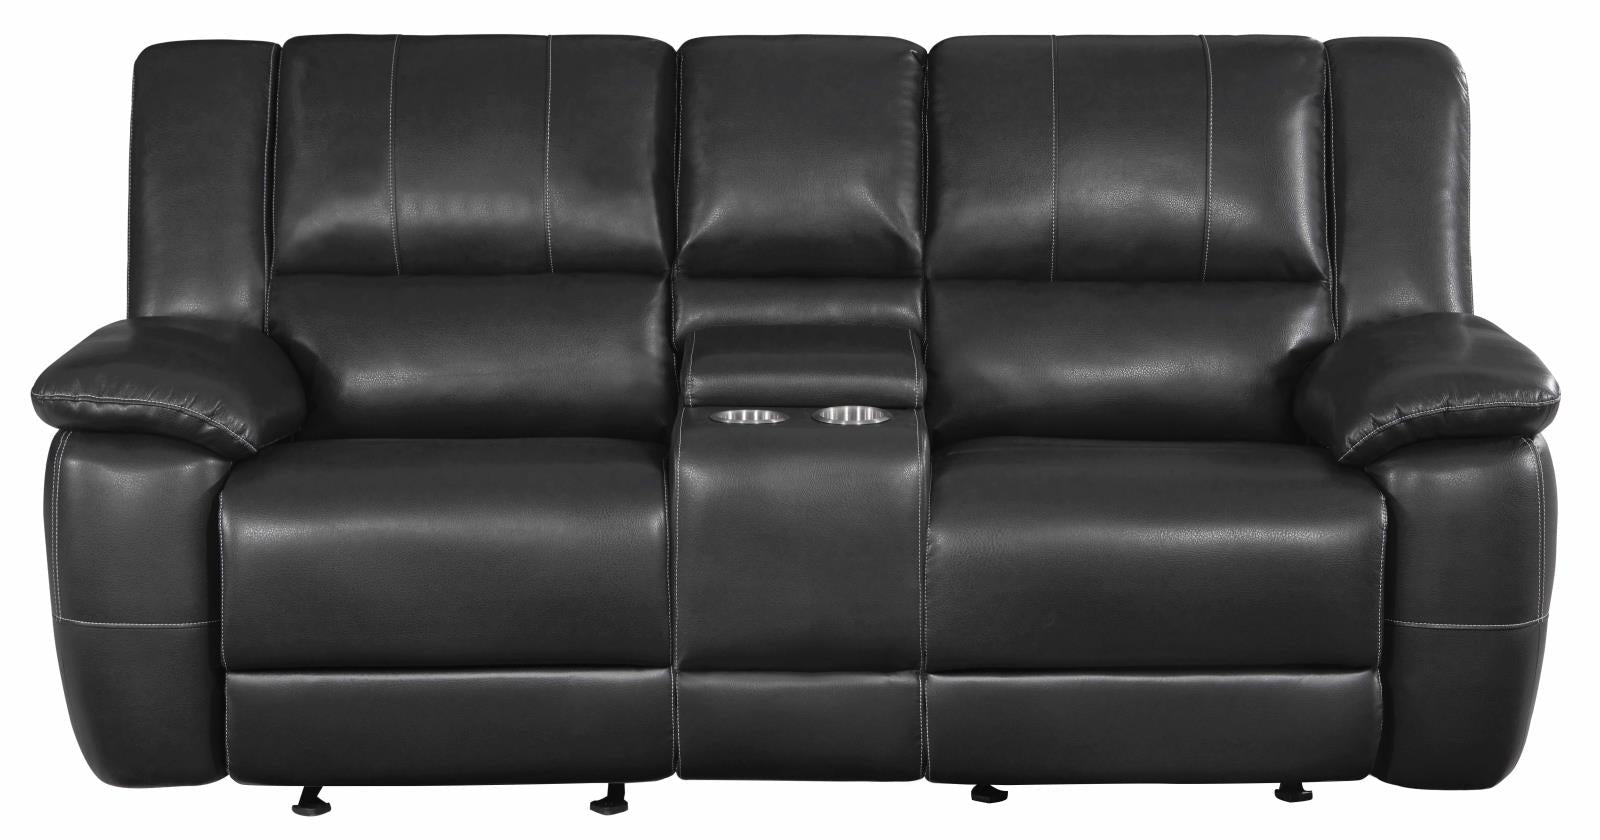 Lee Upholstered Pillow Top Arm Living Room Set Black - What A Room